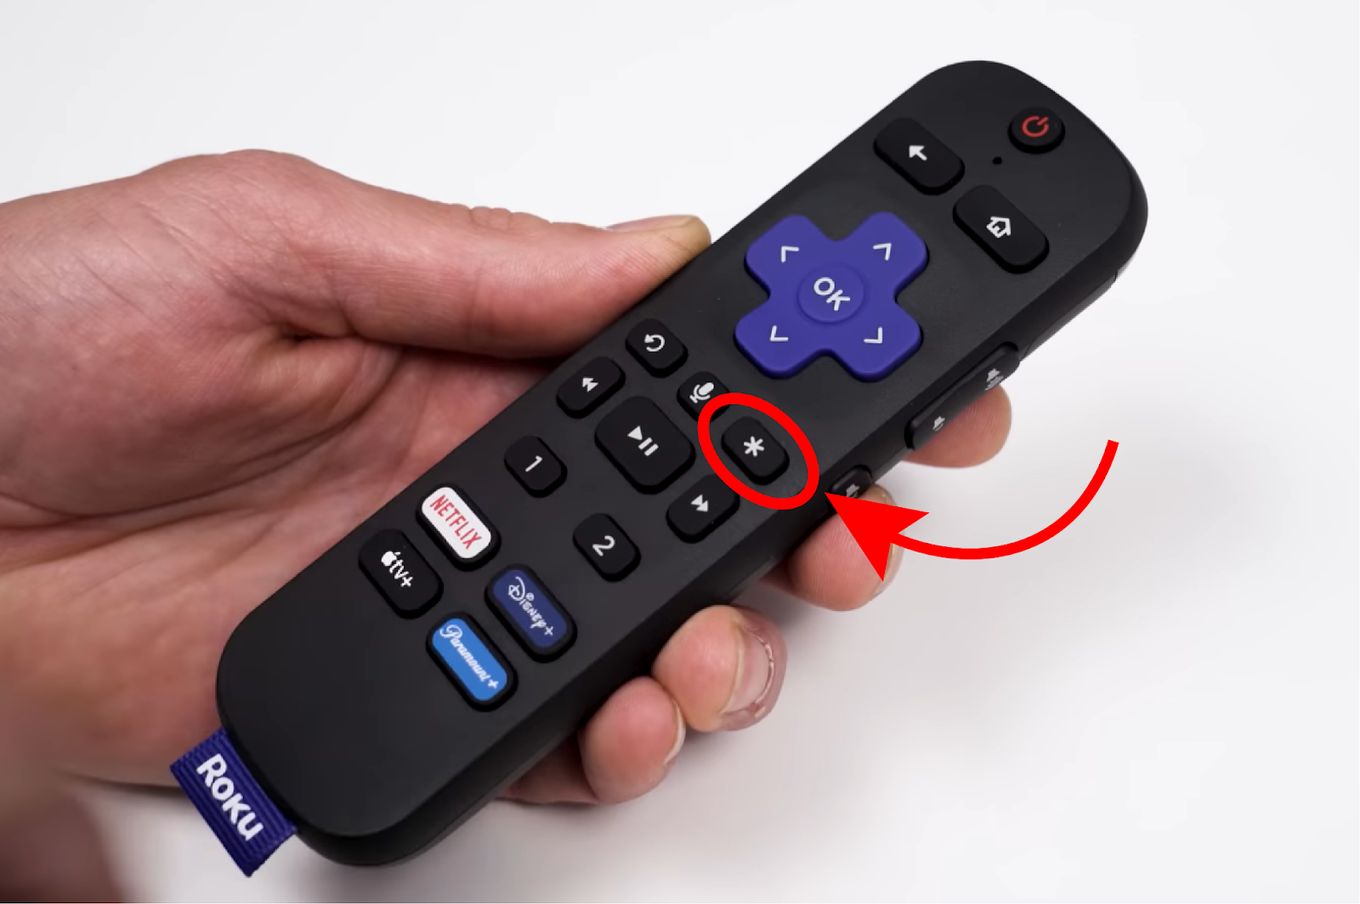  Clear Cache Roku By Deleting Channels - Step 3